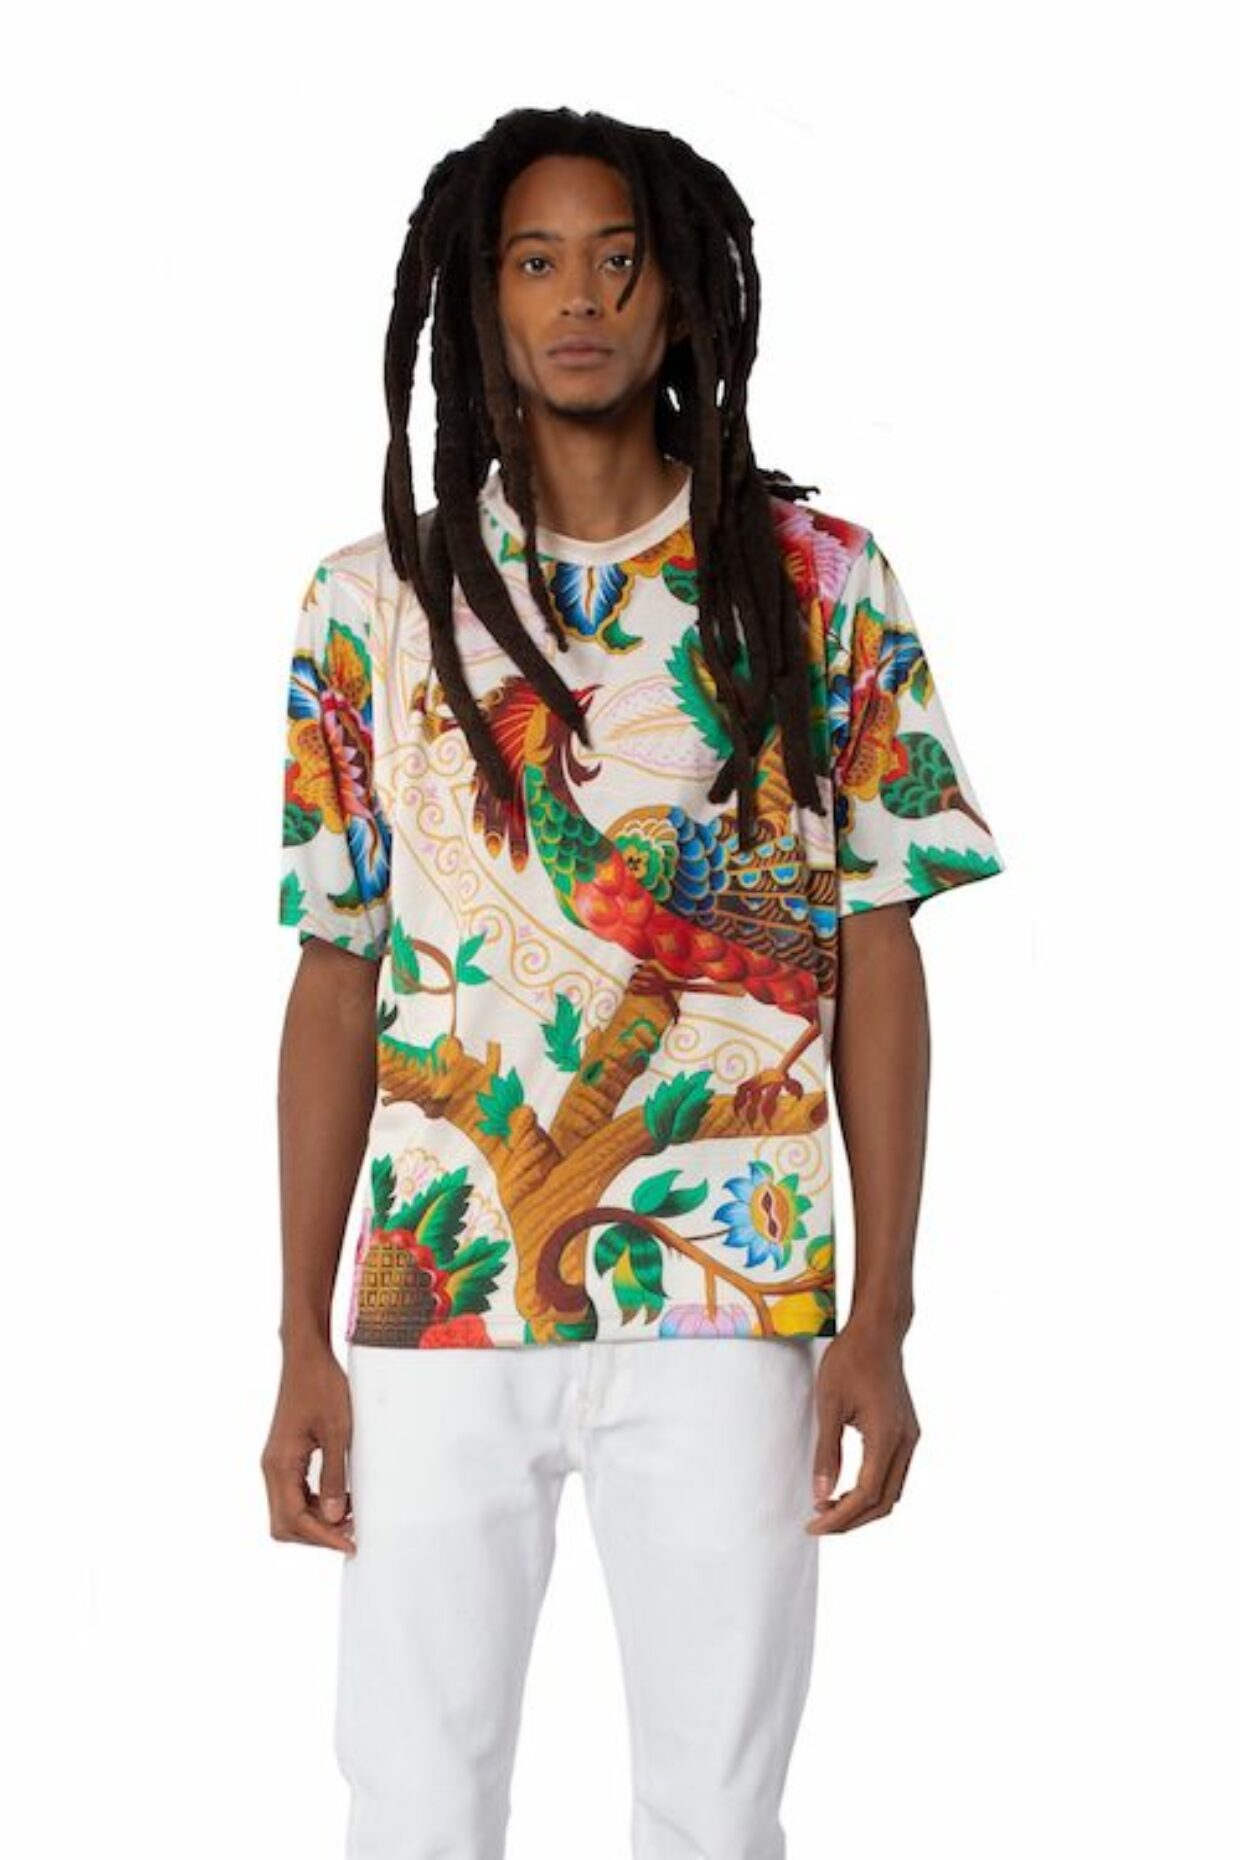 Artist Kehinde Wiley’s New Clothing Collection is a Visual Masterpiece | 3